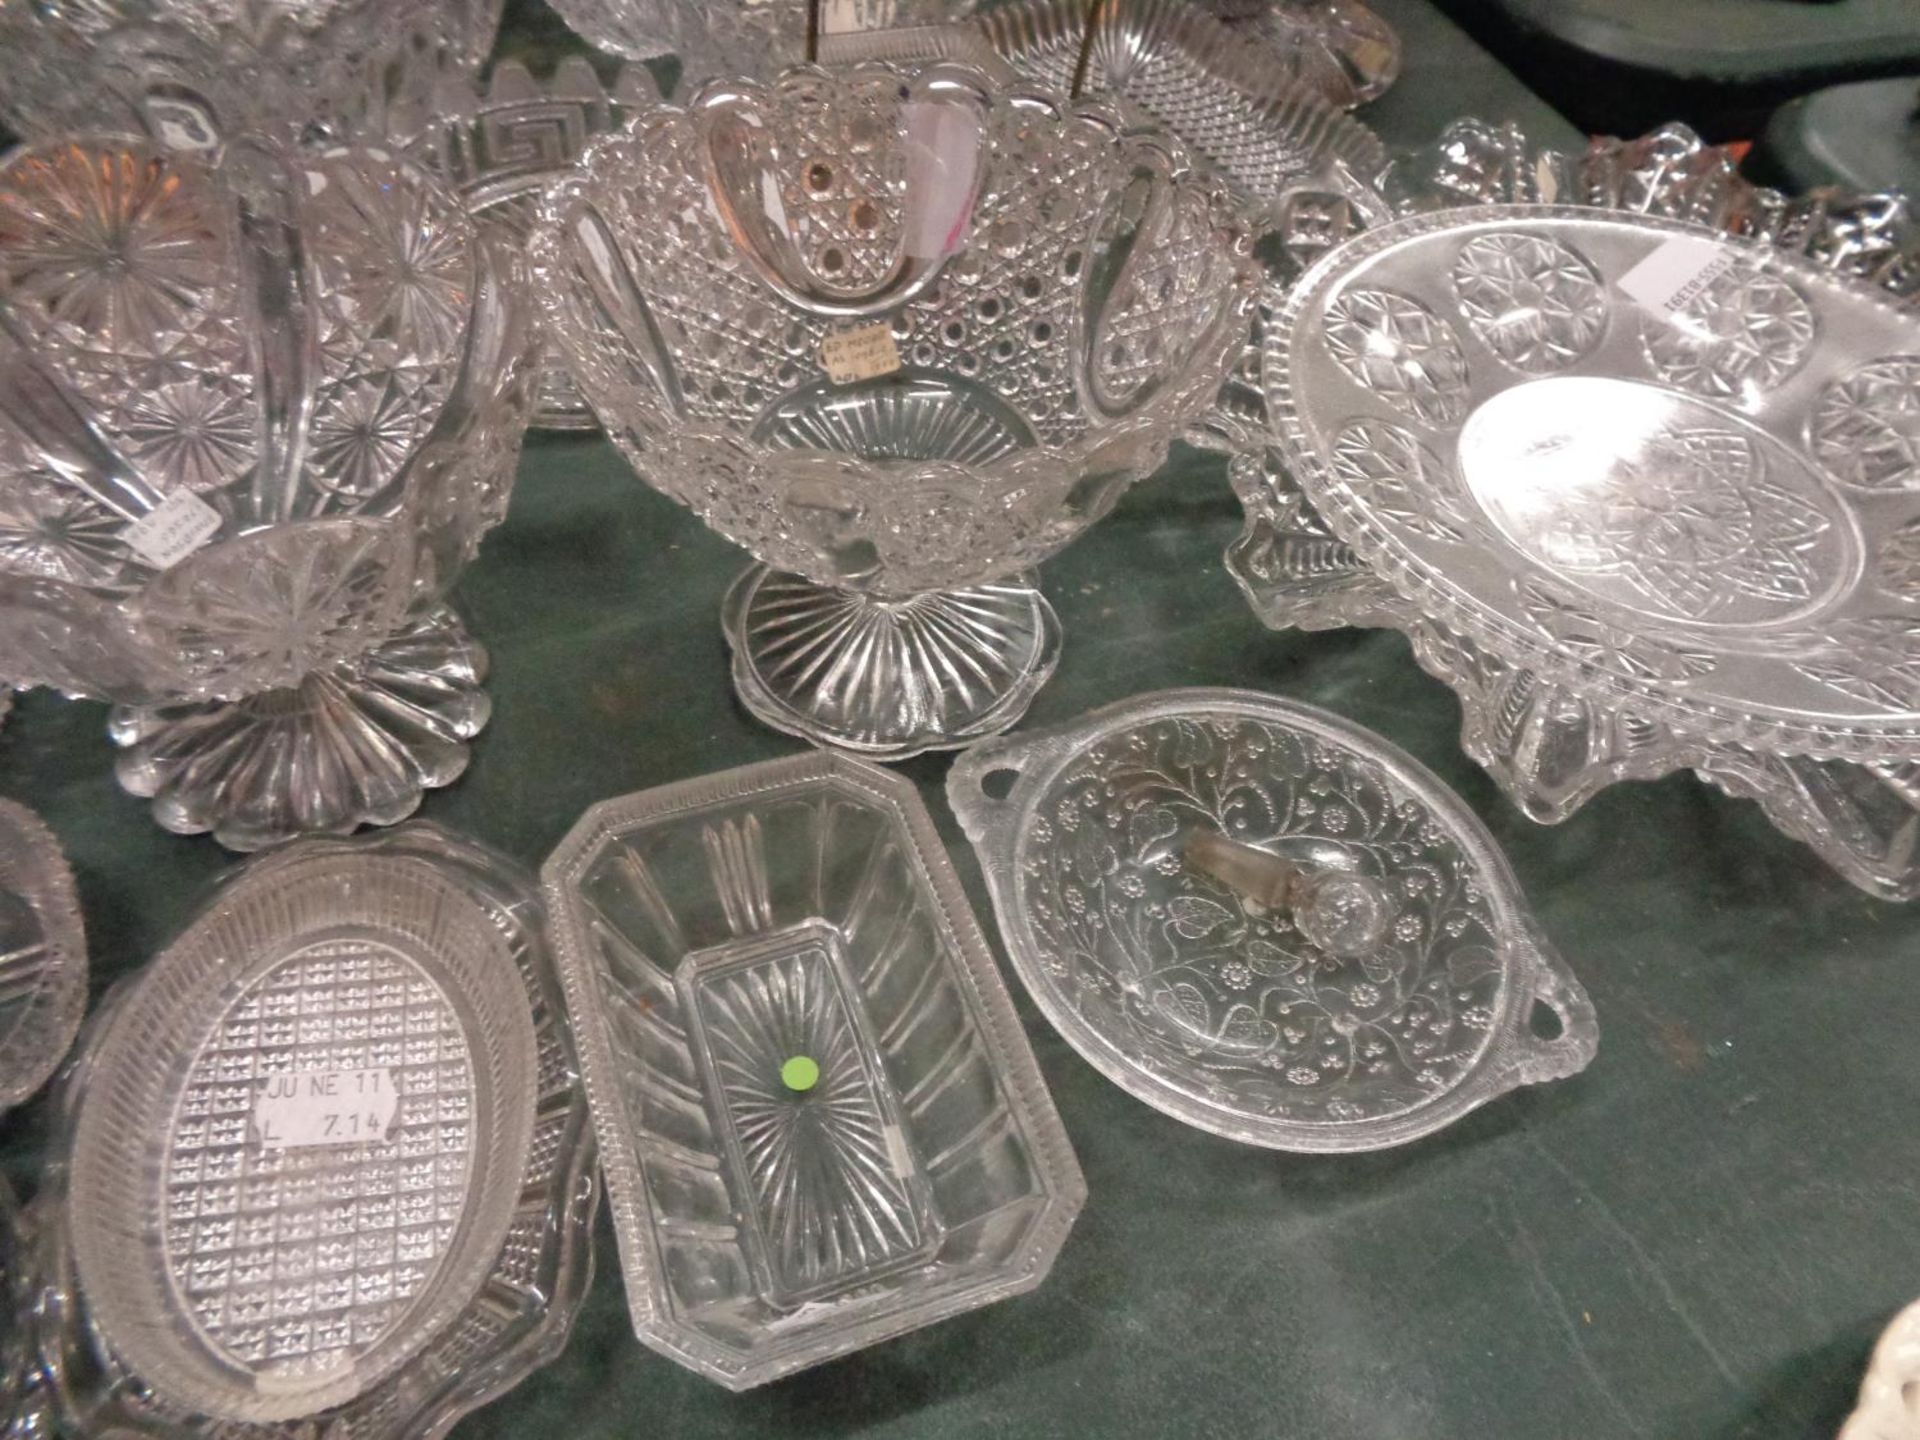 A LARGE SELECTION OF CLEAR GLASSWARE BOWLS, TRINKET DISHES AND A CAKE STAND - Image 3 of 4